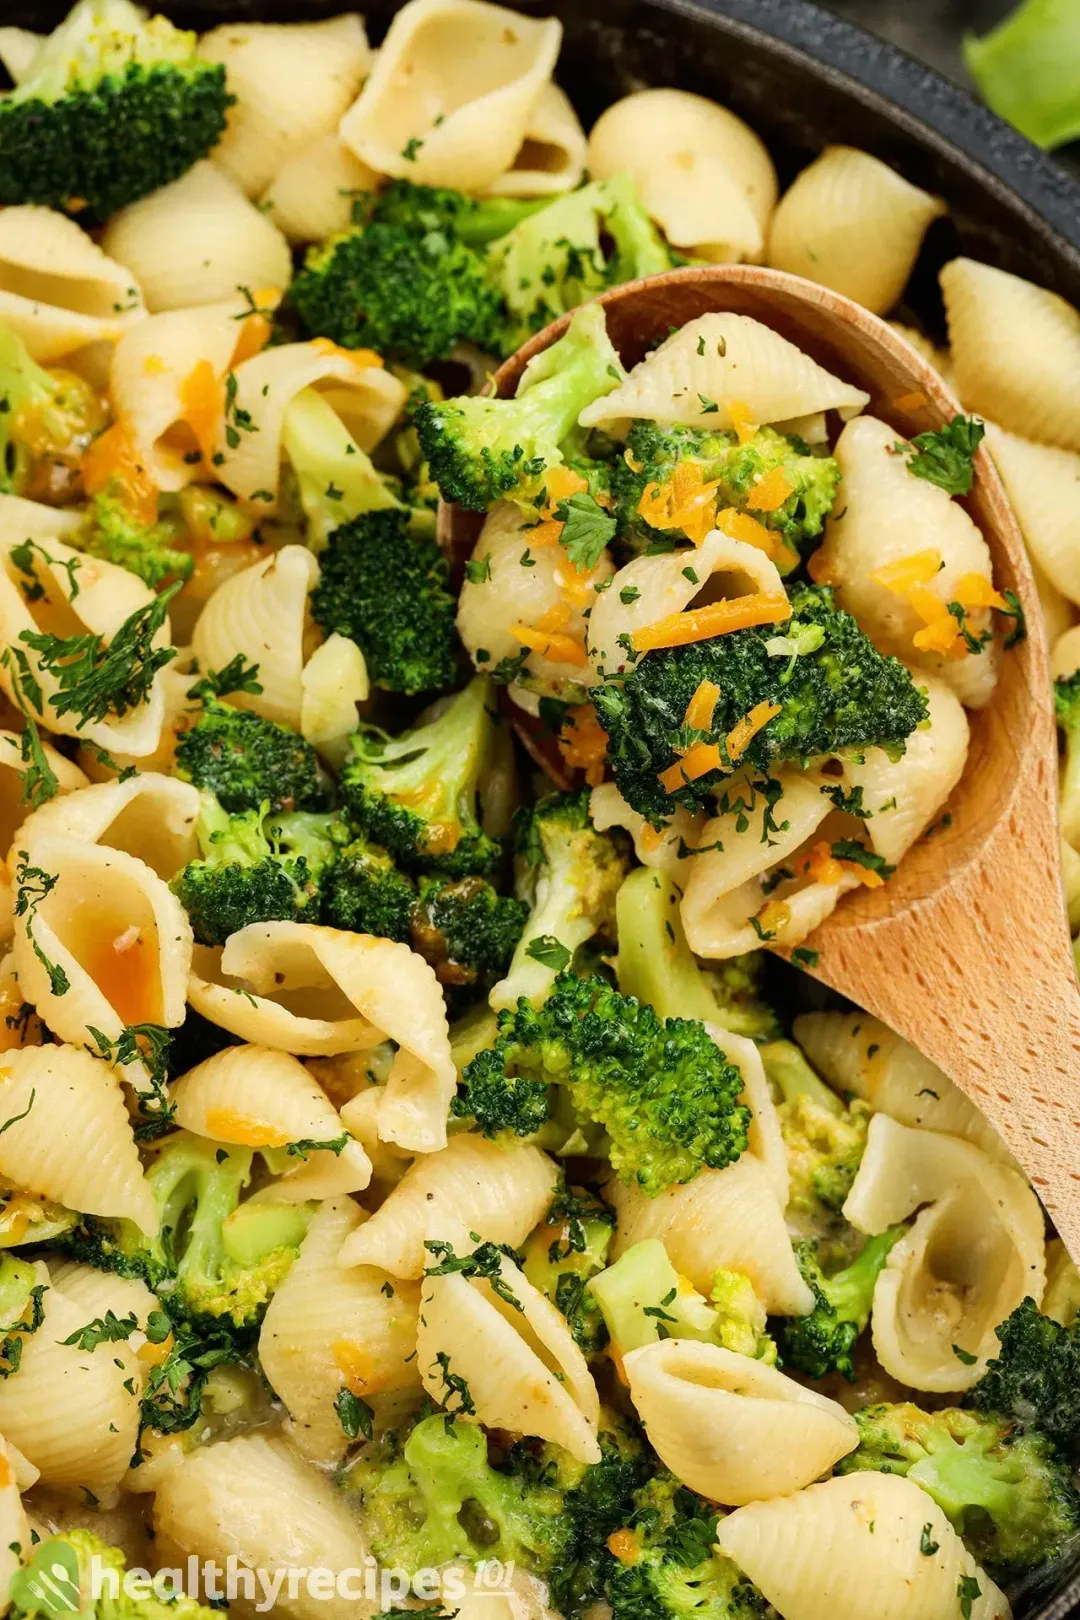 Add ins and Substitutions for Broccoli Pasta